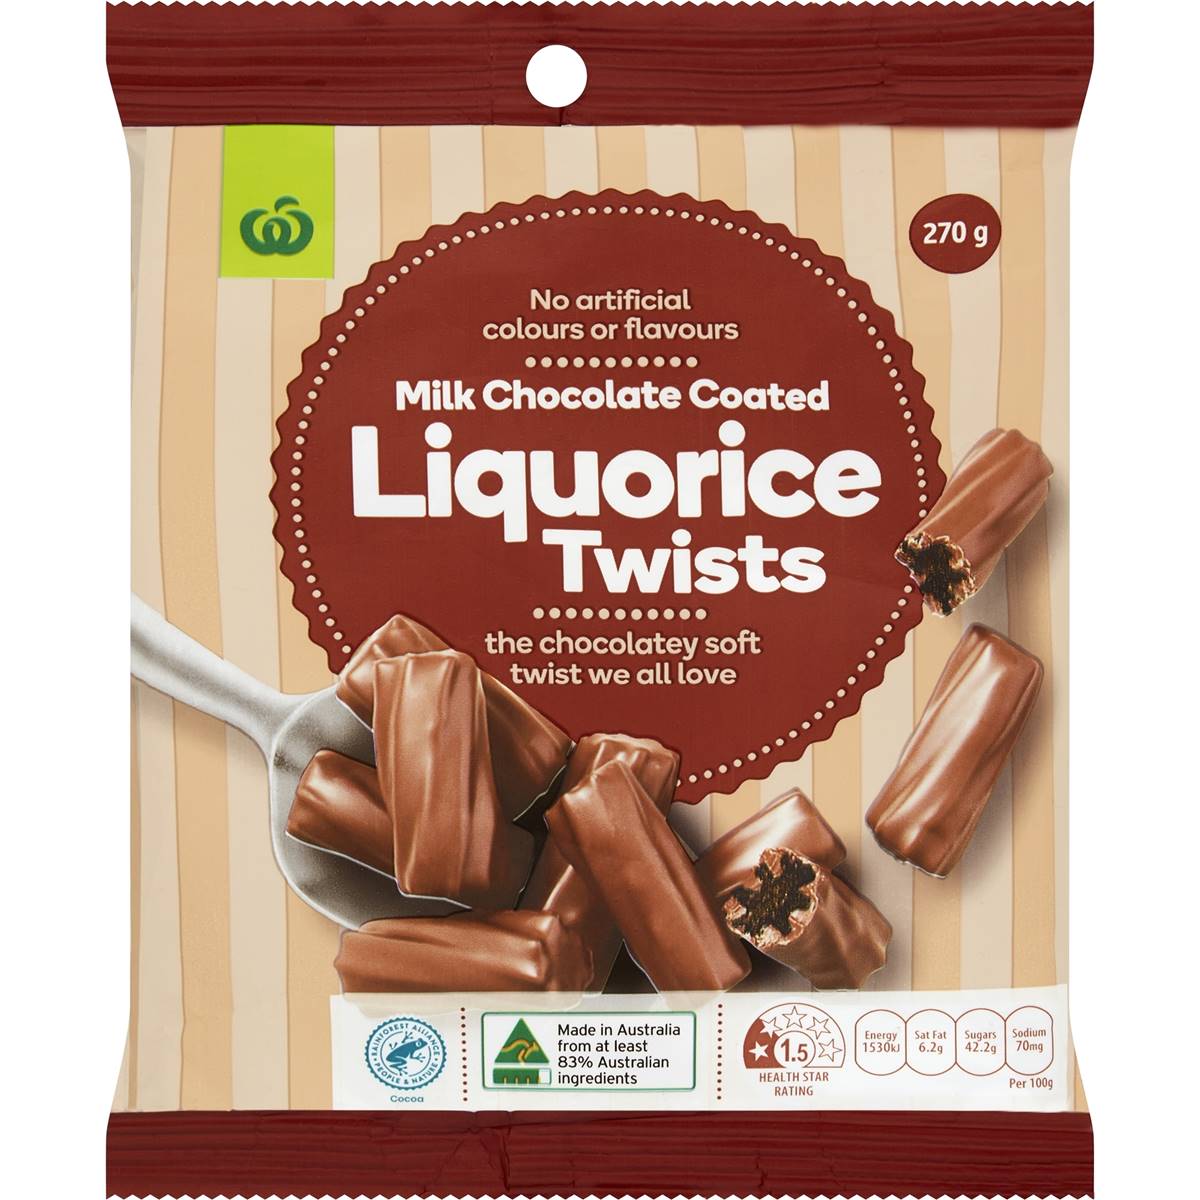 Calories in Woolworths Milk Chocolate Coated Liquorice Twists